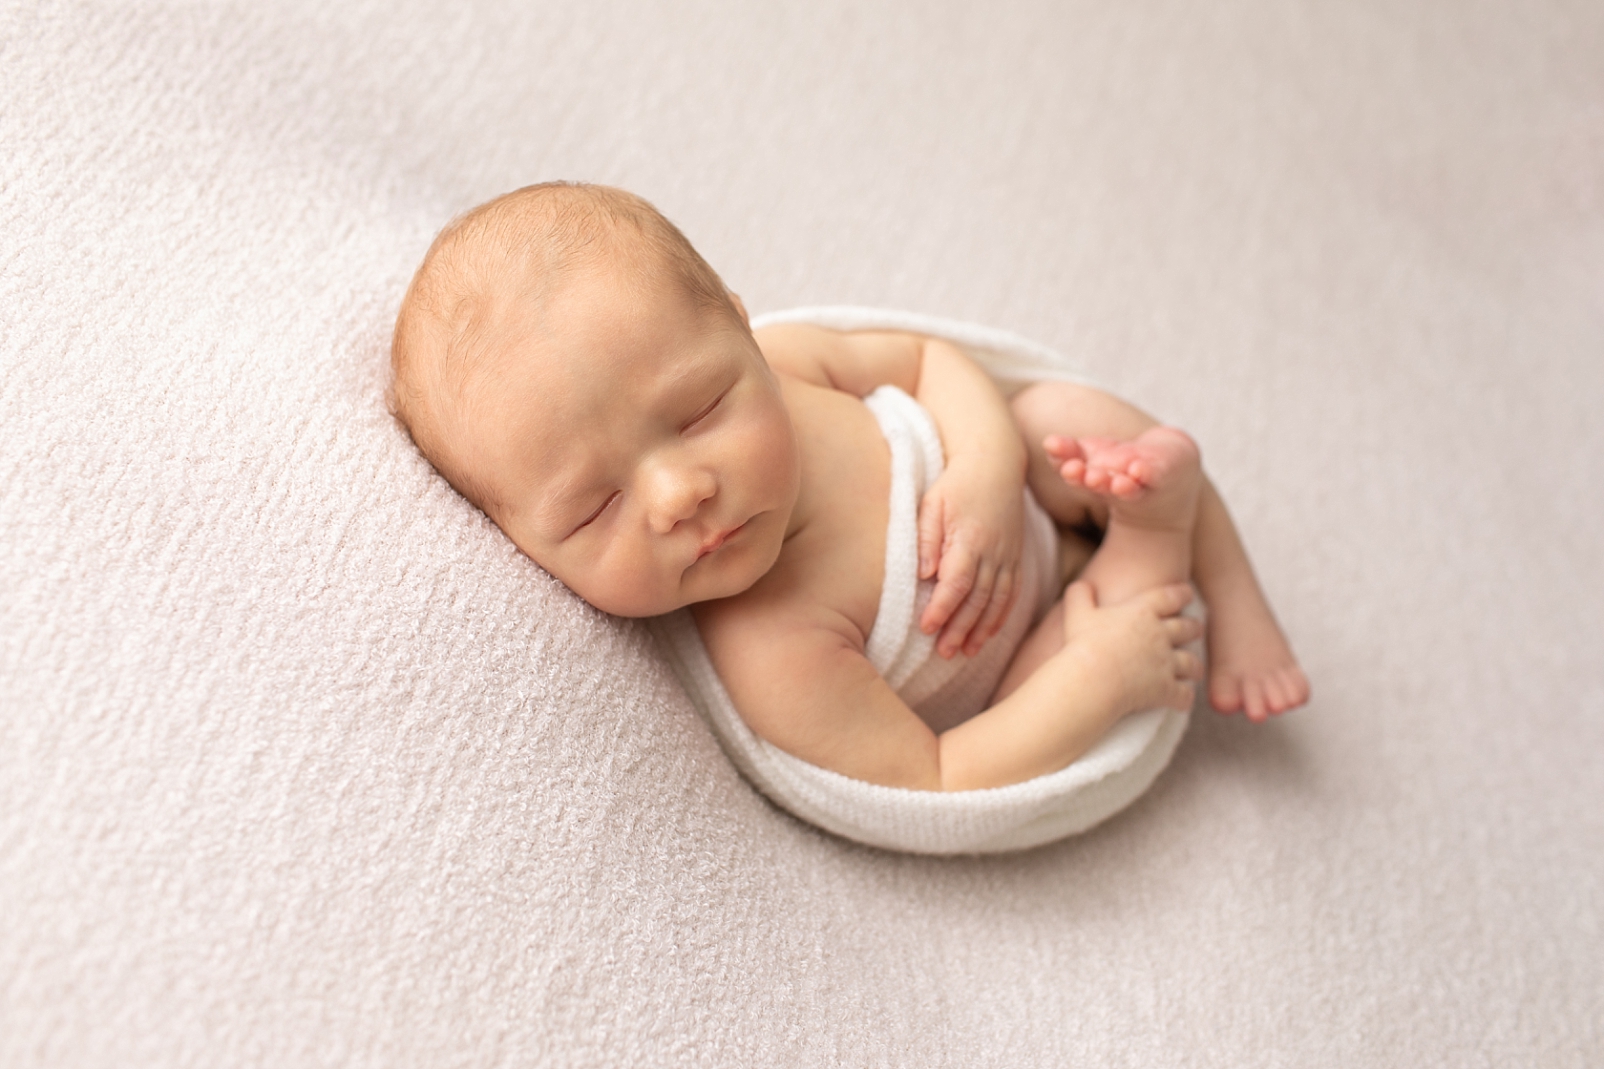 newborn baby boy in a white wrap lying on his back and why you should hire a professional newborn photographer